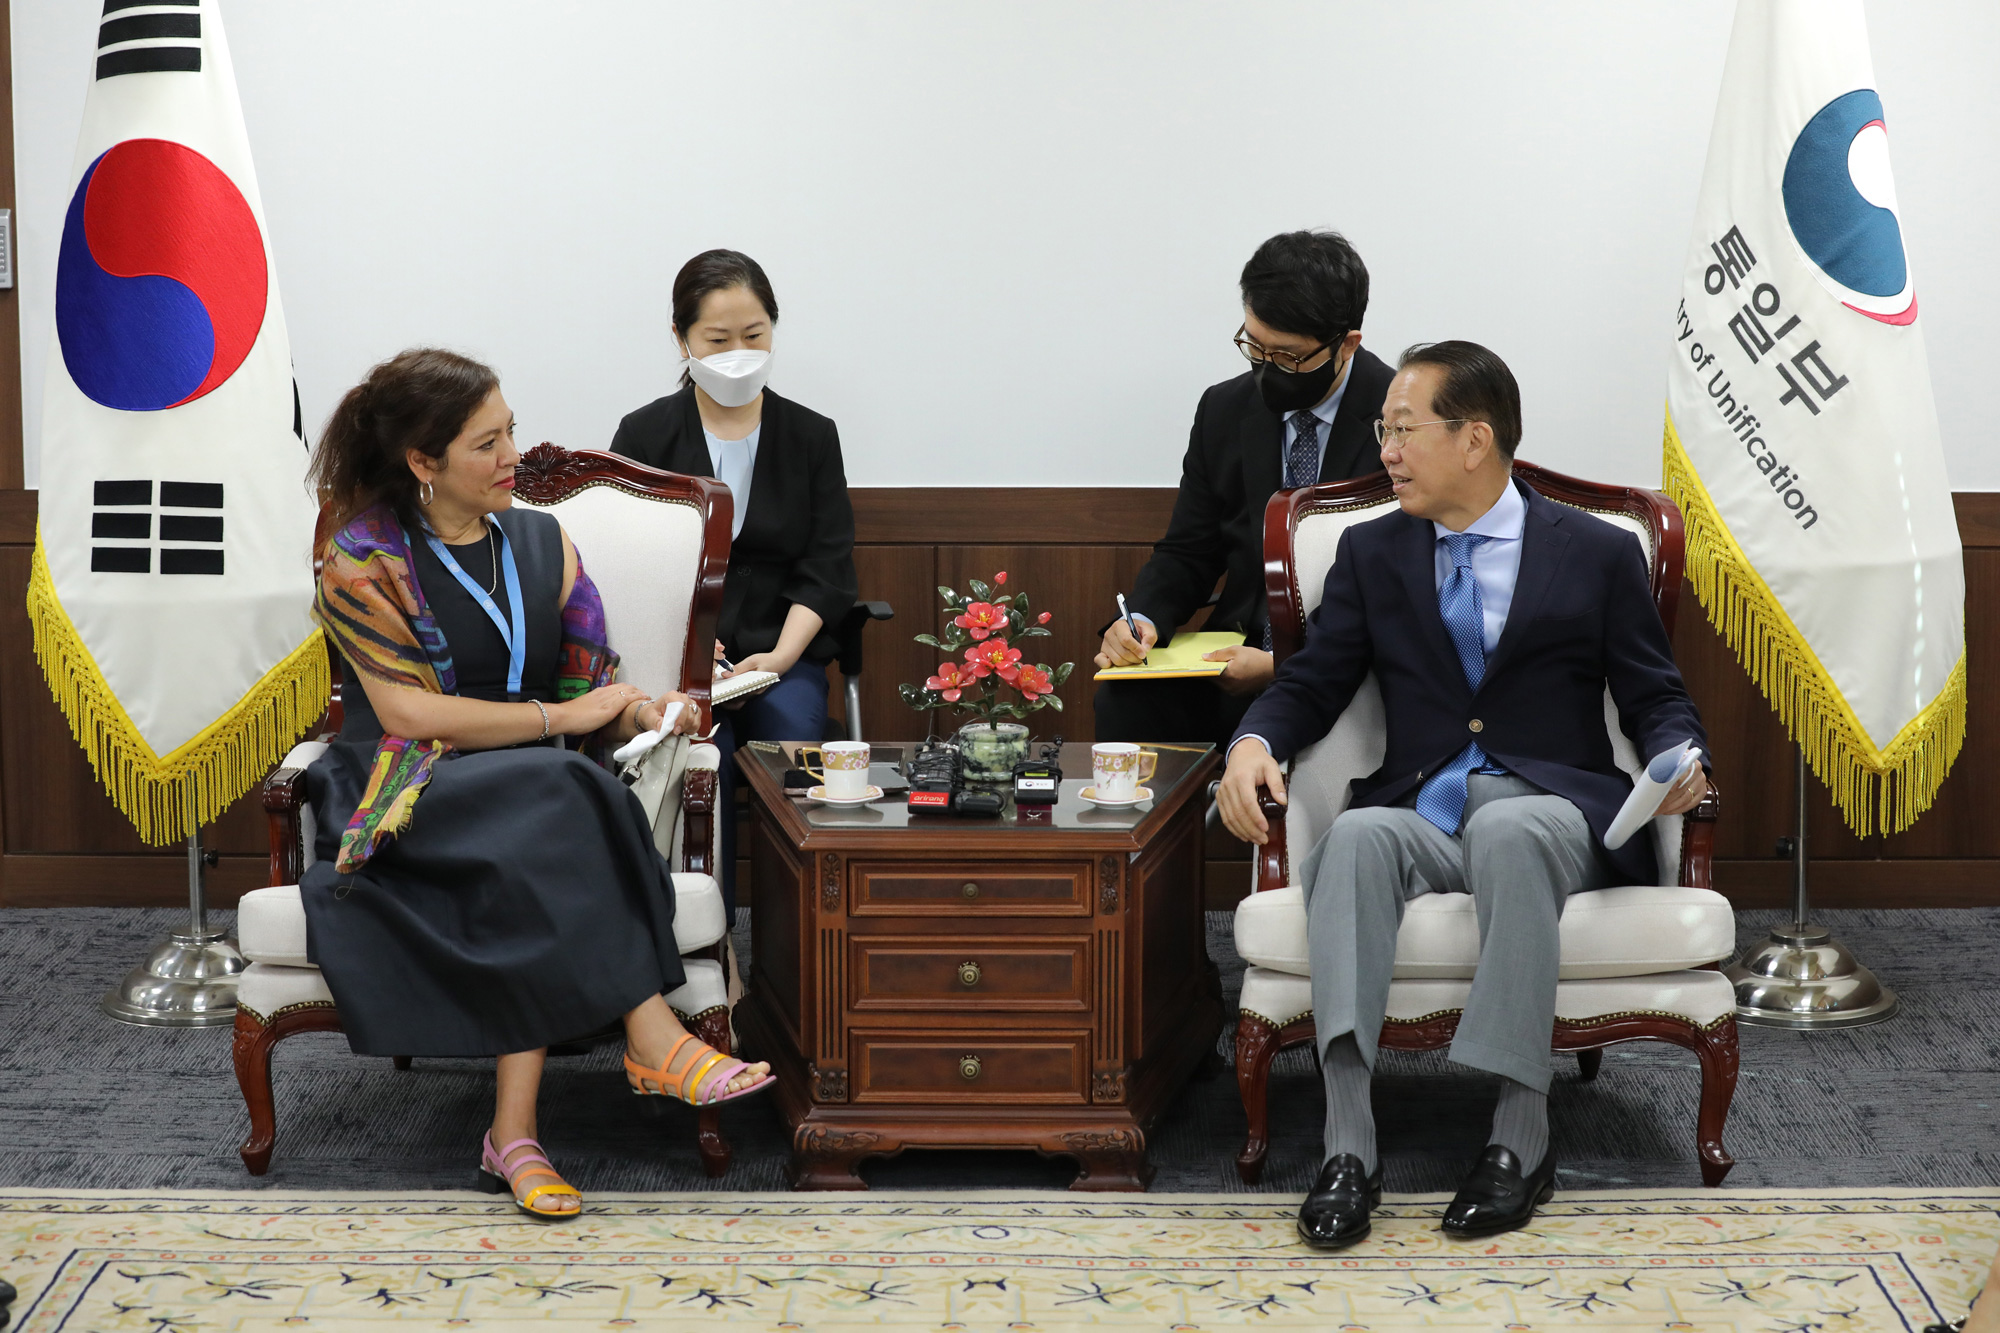 Unification Minister Kwon Youngse Meets UN Special Rapporteur on Human Rights Situations in North Korea